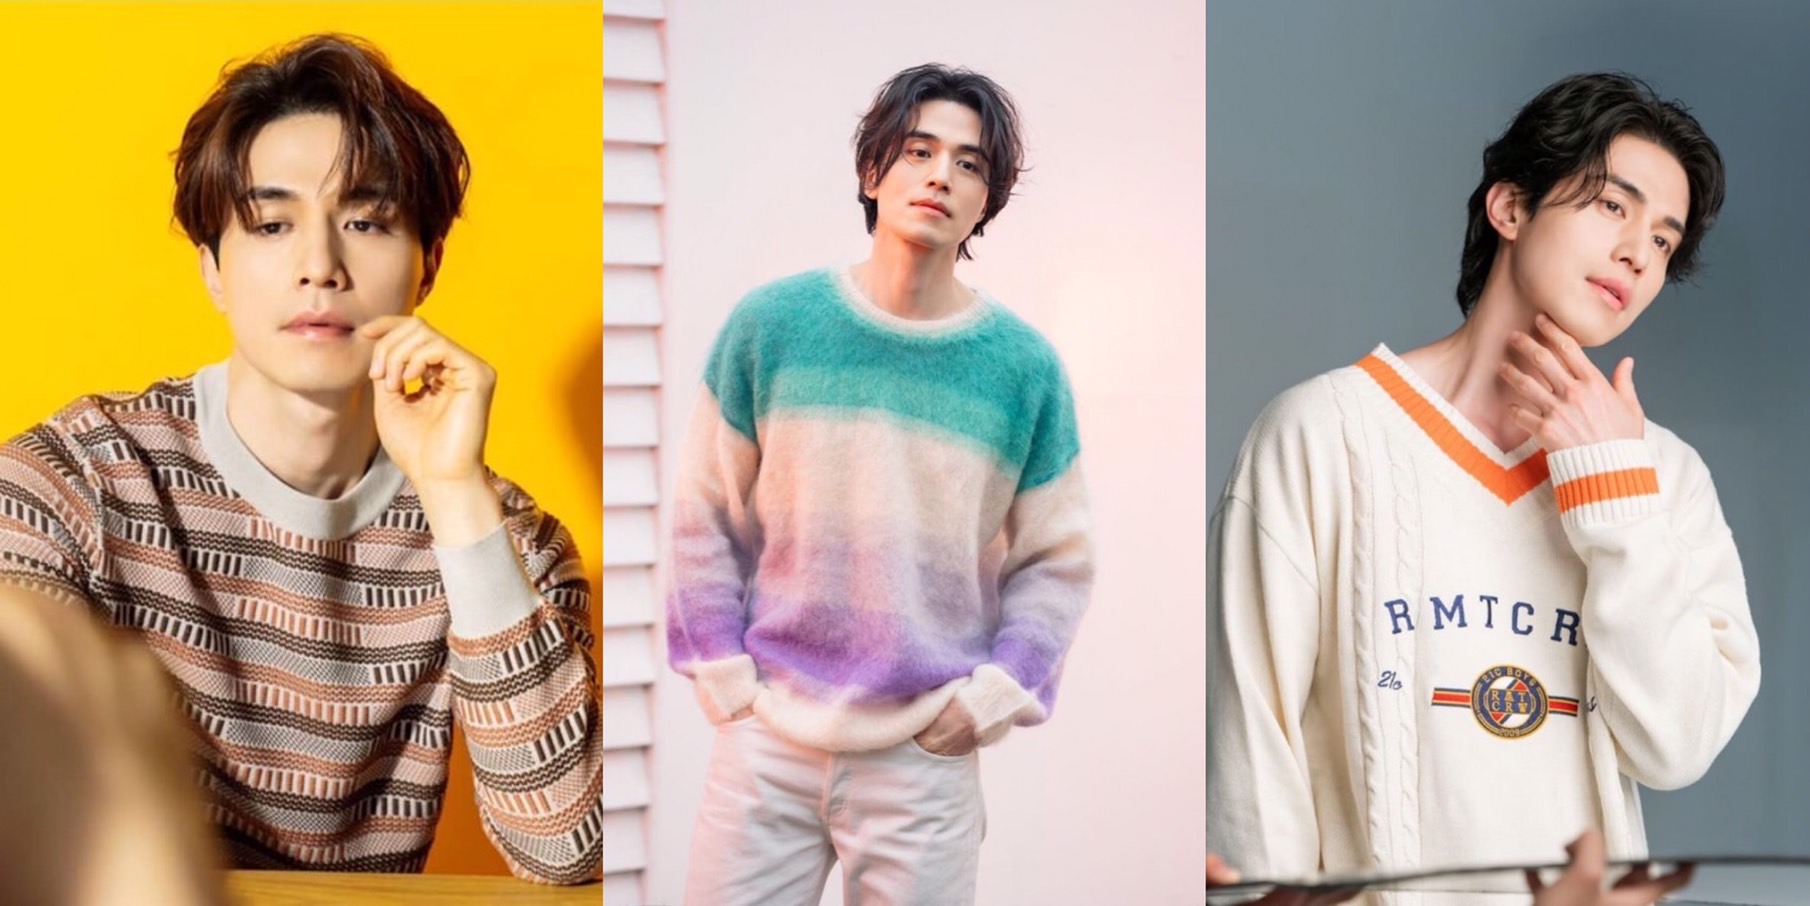 Even More Charming at 39 Years Old, These 5 Photoshoots of Lee Dong Wook in Sweaters are Adorable!